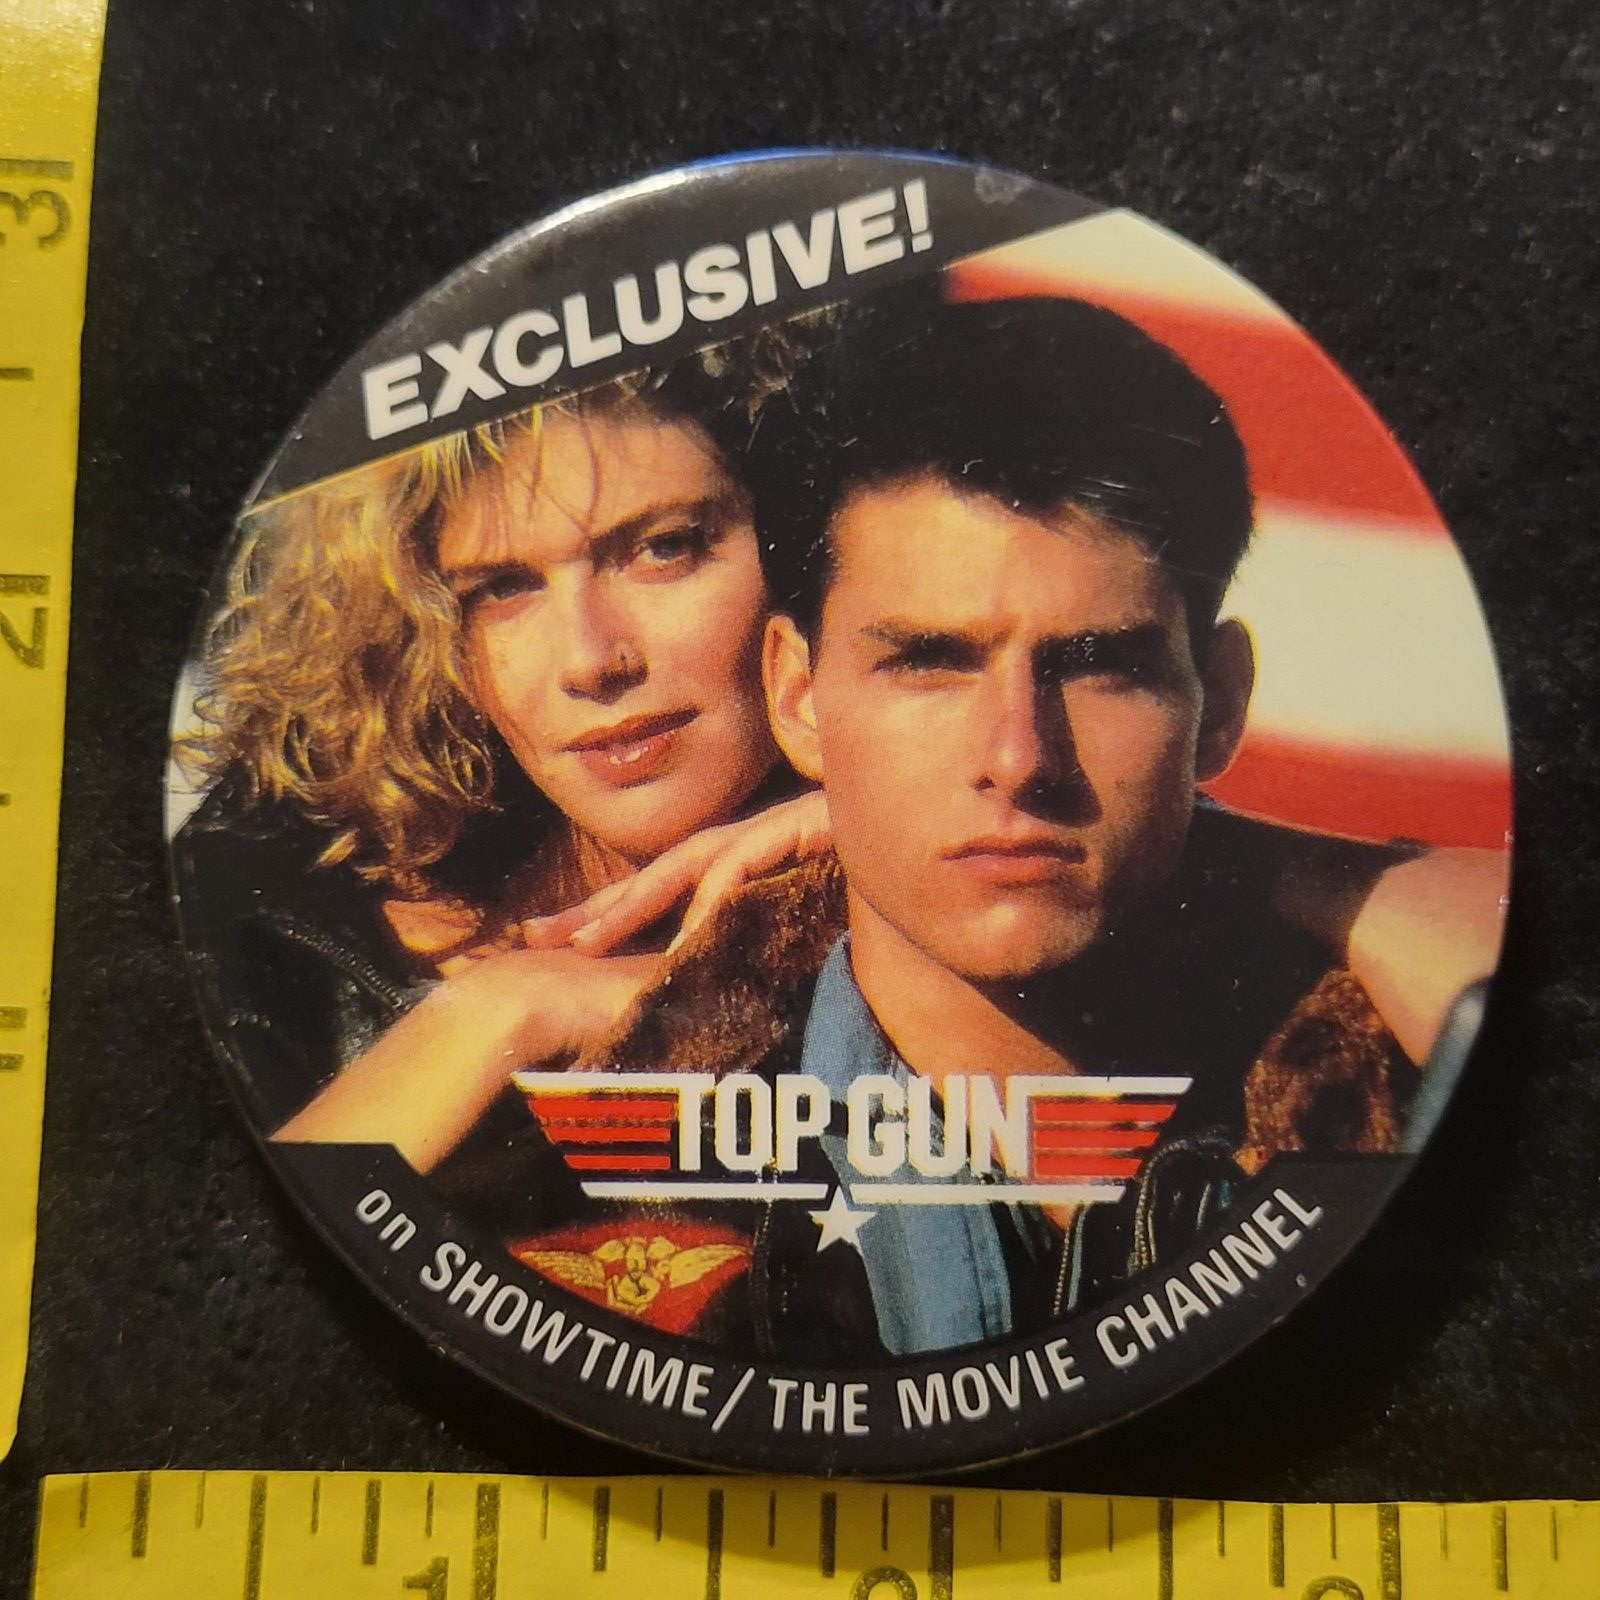 1986 Top Gun Exclusive on Showtime The Movie Channel Promo ad Pinback Button Pin